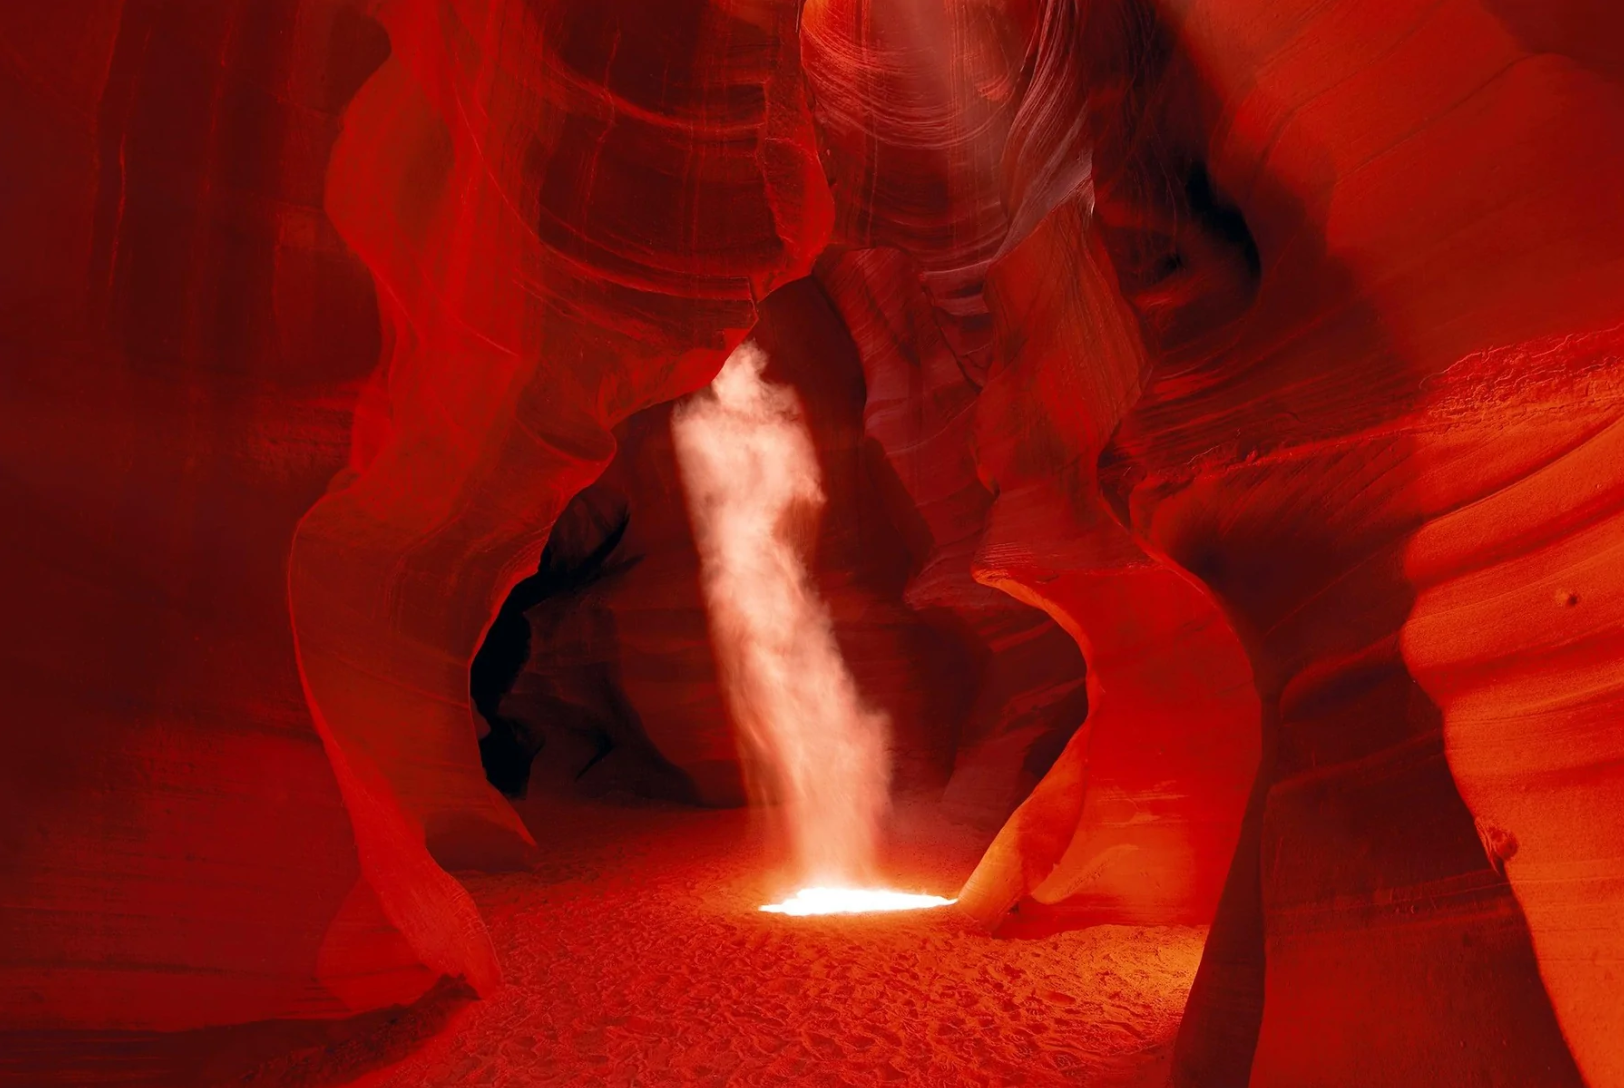 Image by Peter Lik